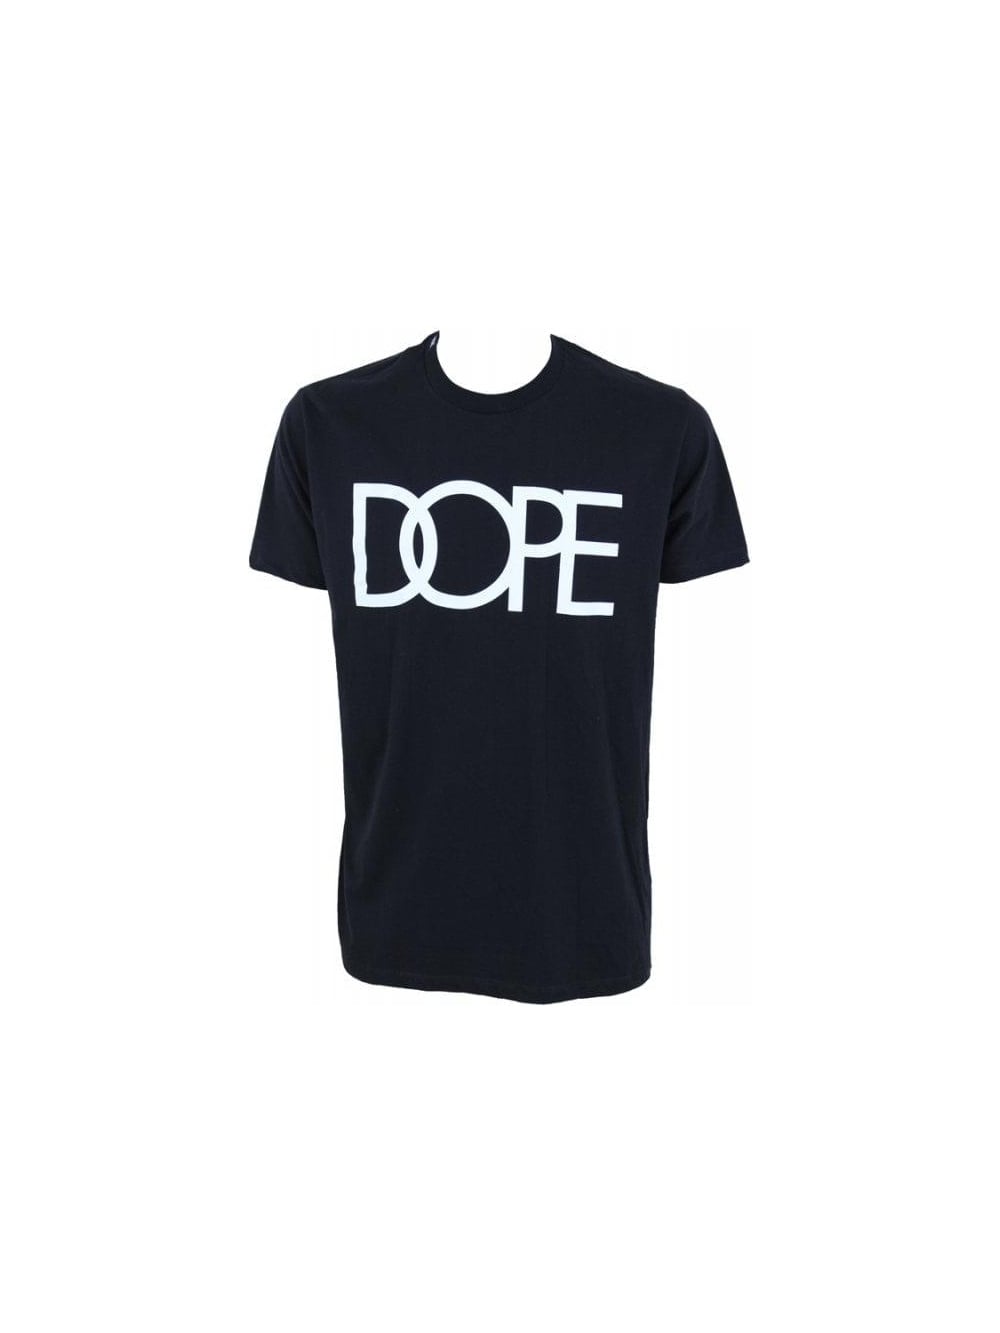 Dope Couture Logo - DOPE Couture Logo T.Shirt - Black